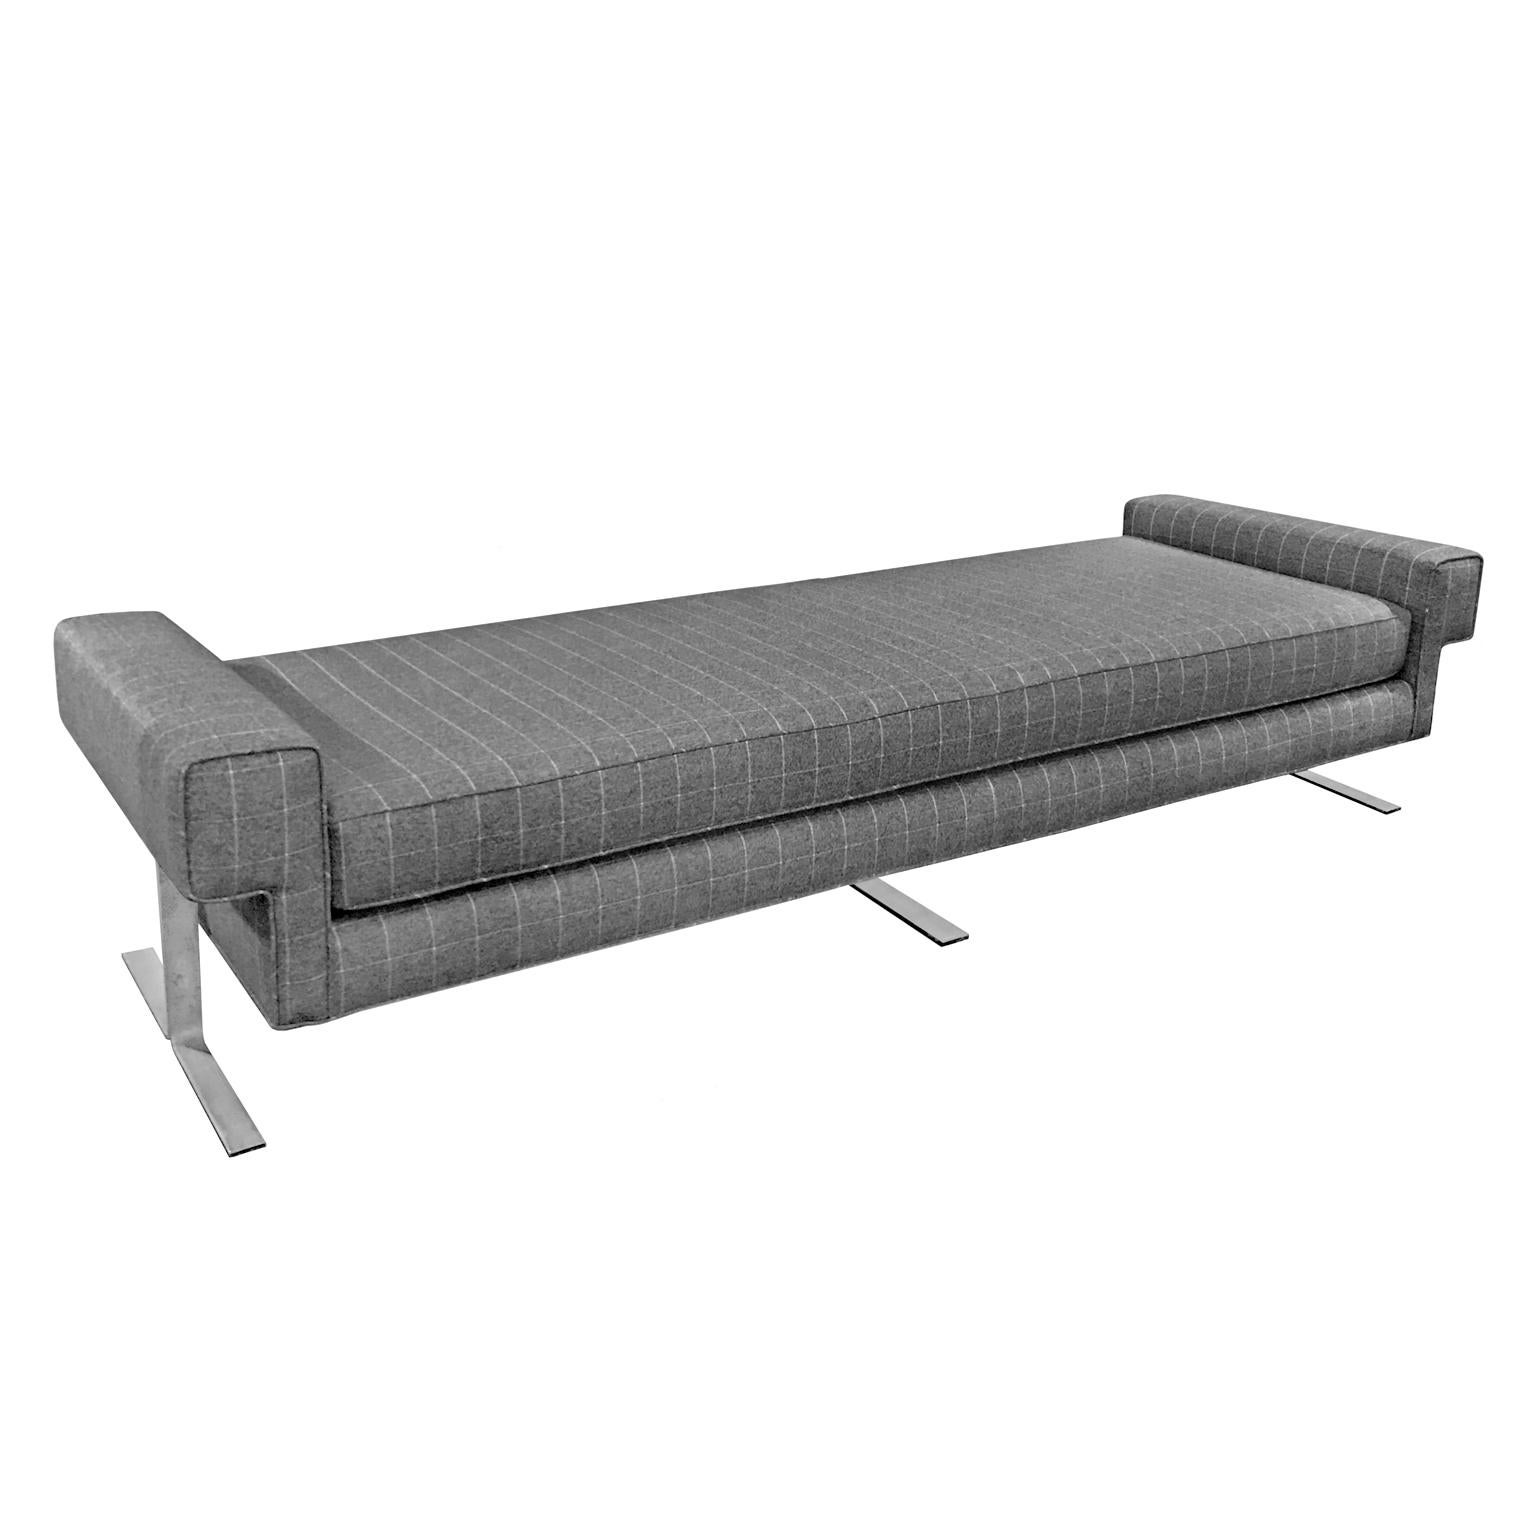 1960s Daybed in Grey Windowpane Flannel on Chromed Iron Base im Angebot